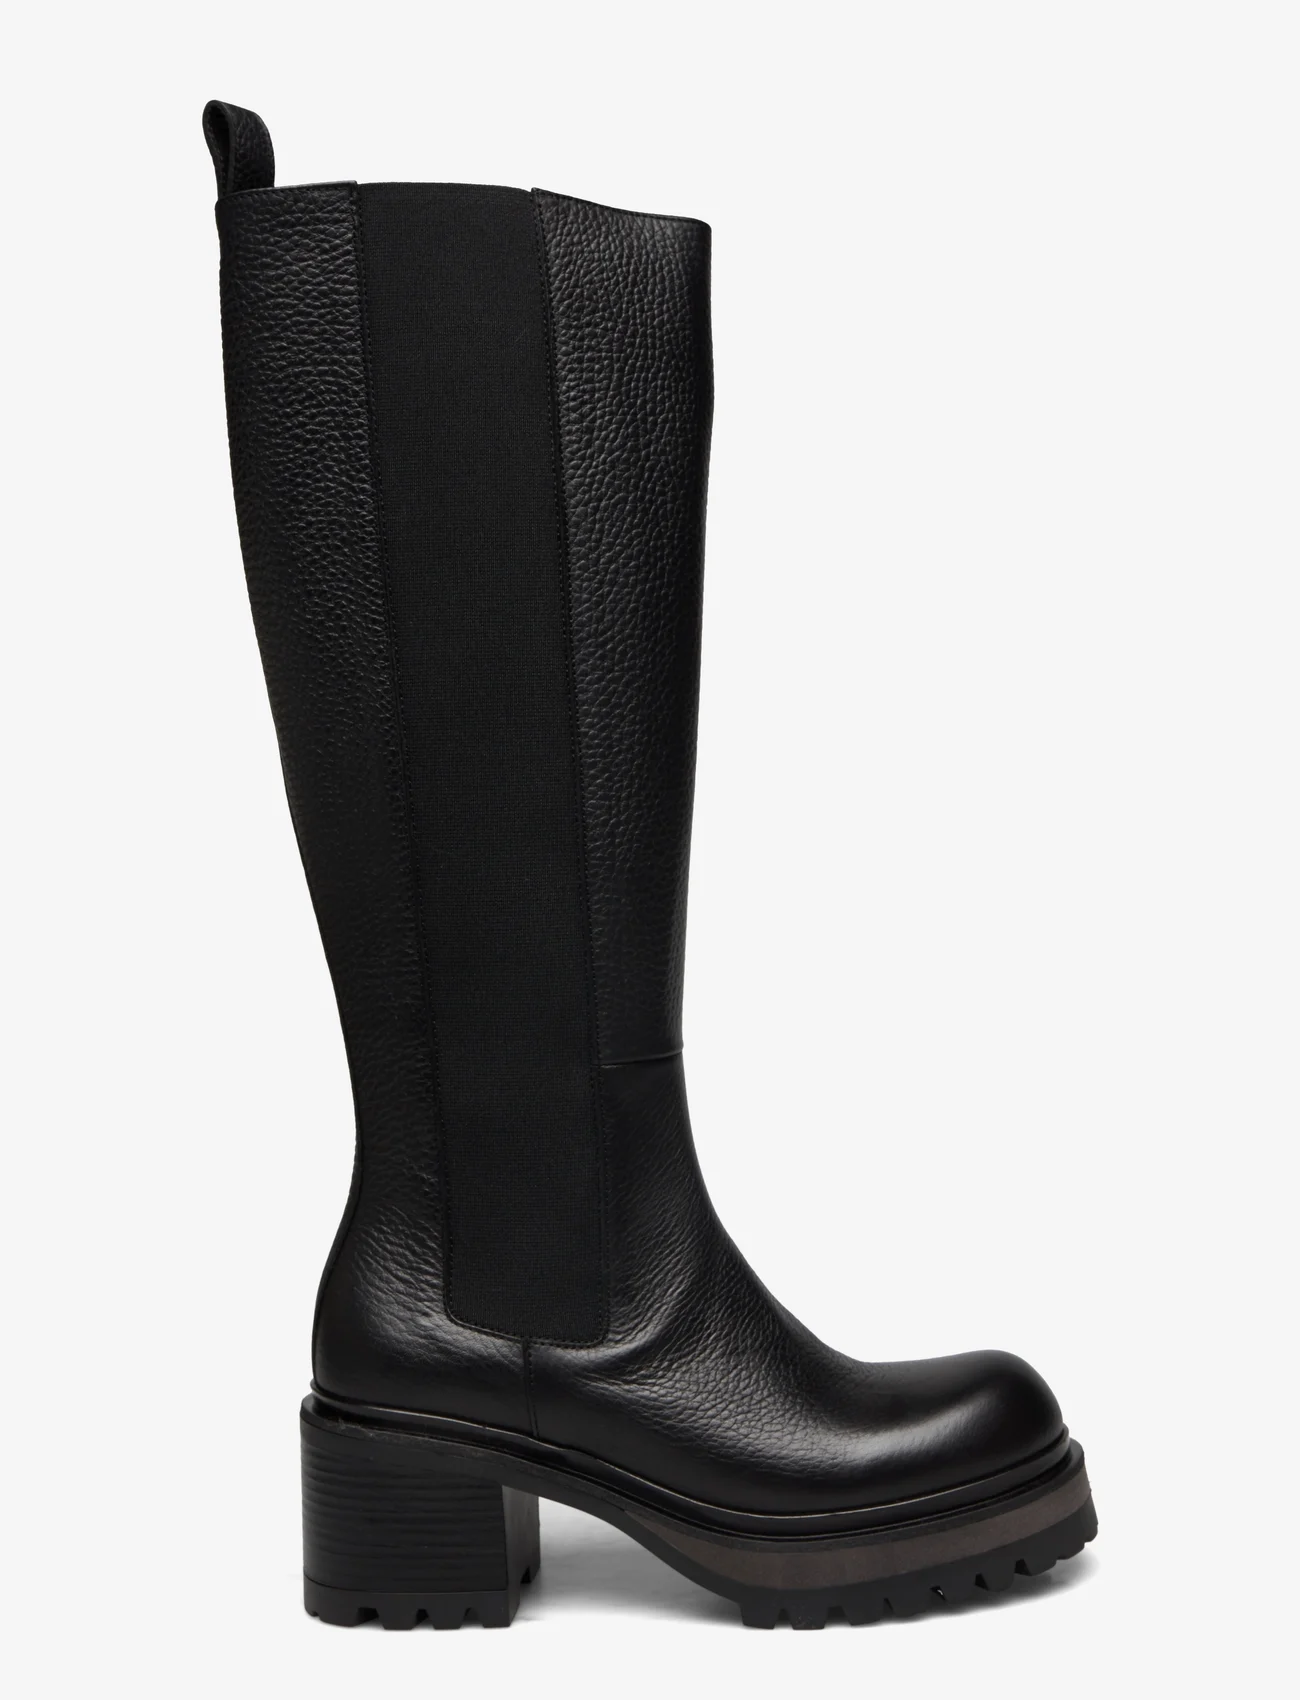 Laura Bellariva - ANKLE BOOTS - knee high boots - black - 1